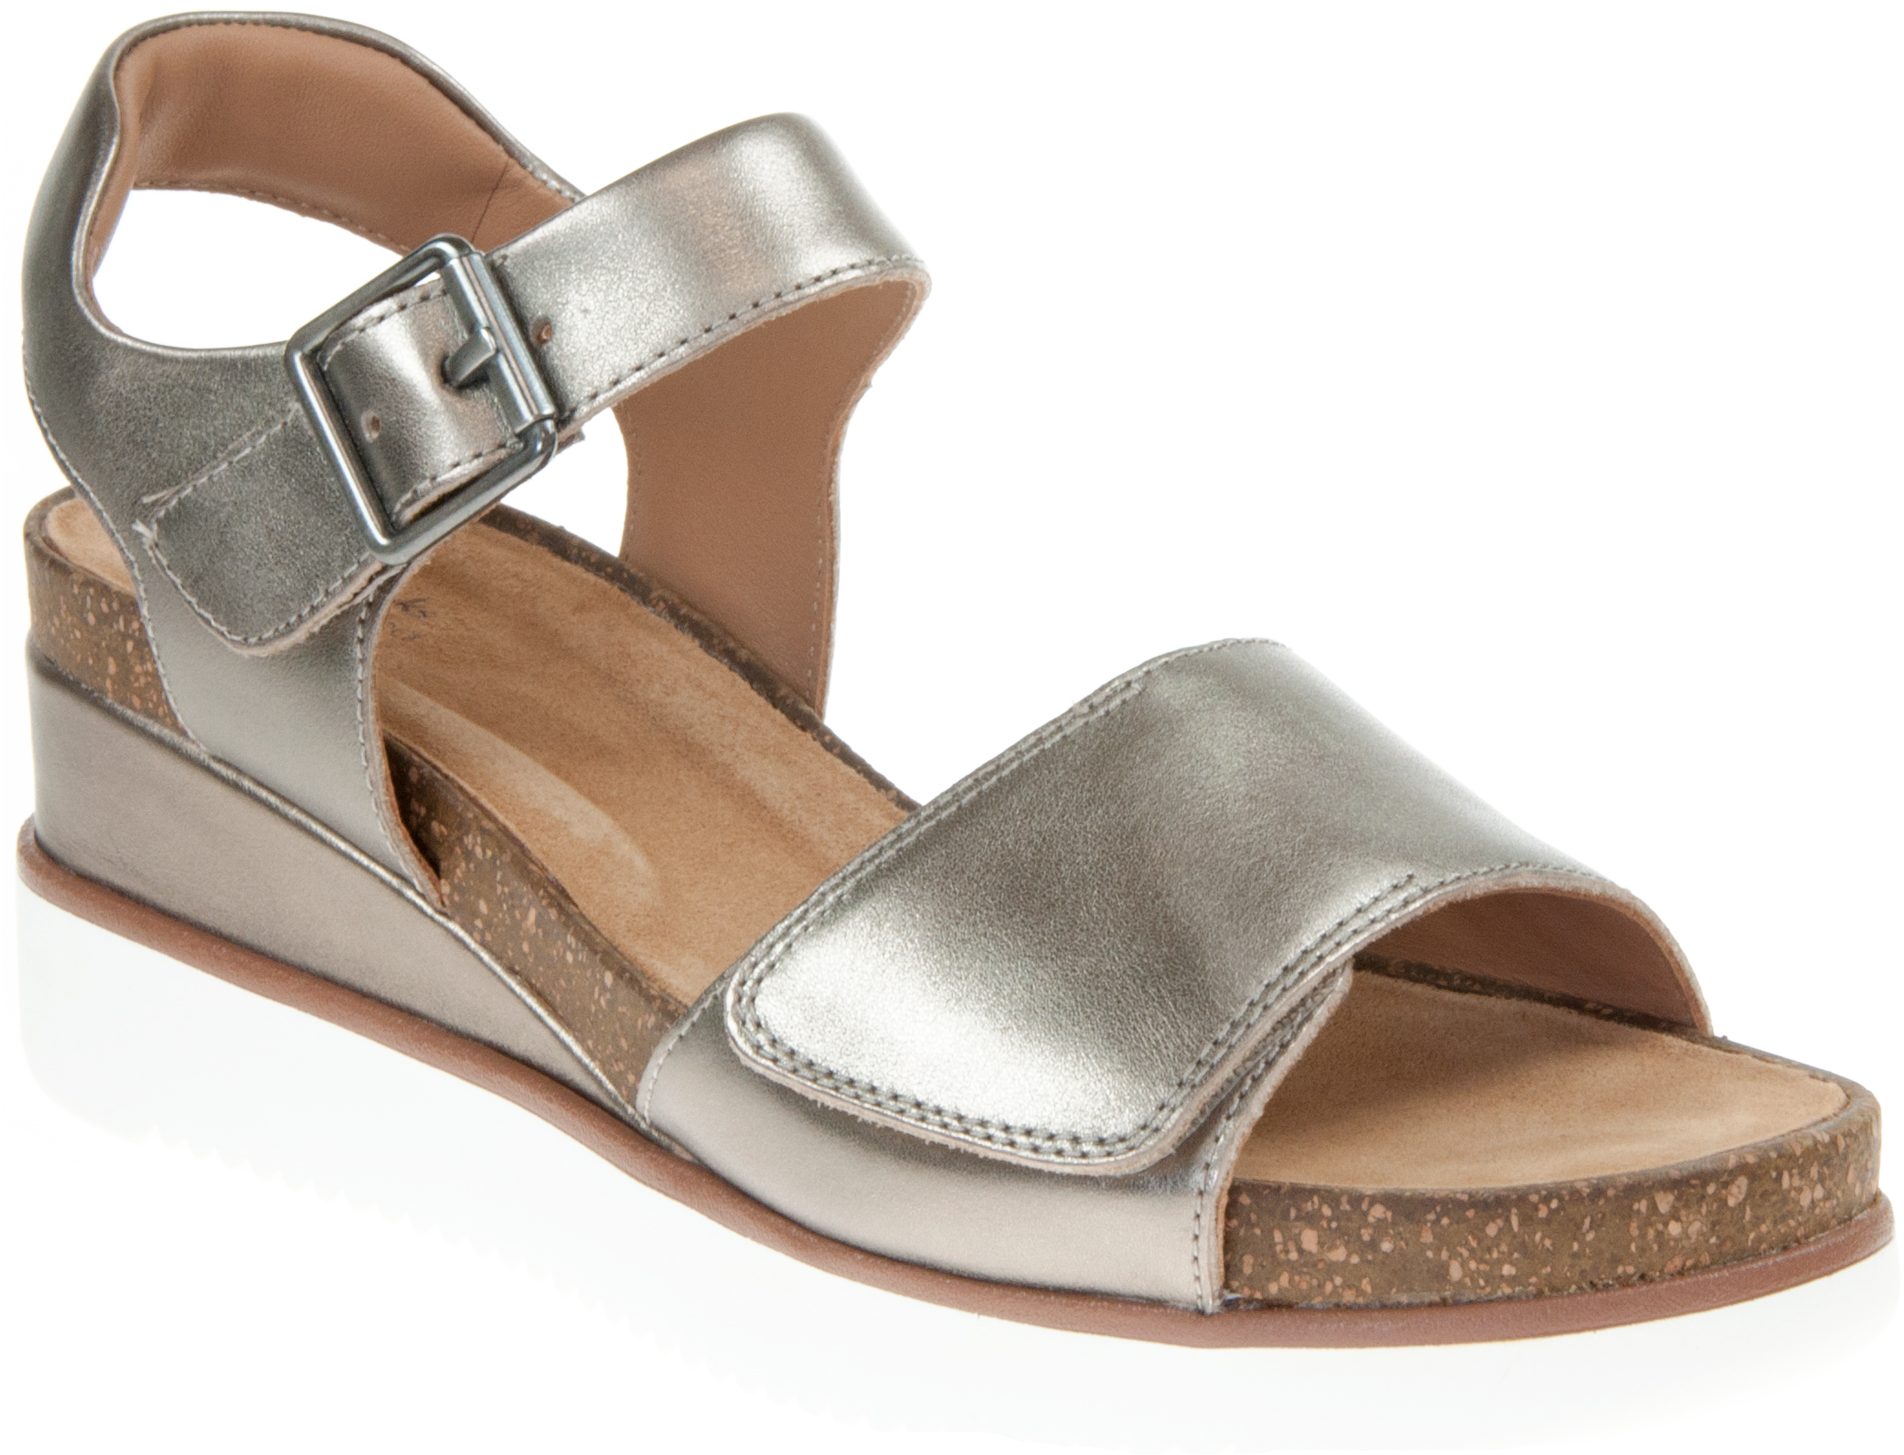 Clarks Lizby Strap Gold Metallic 26159186 - Full Sandals - Humphries Shoes